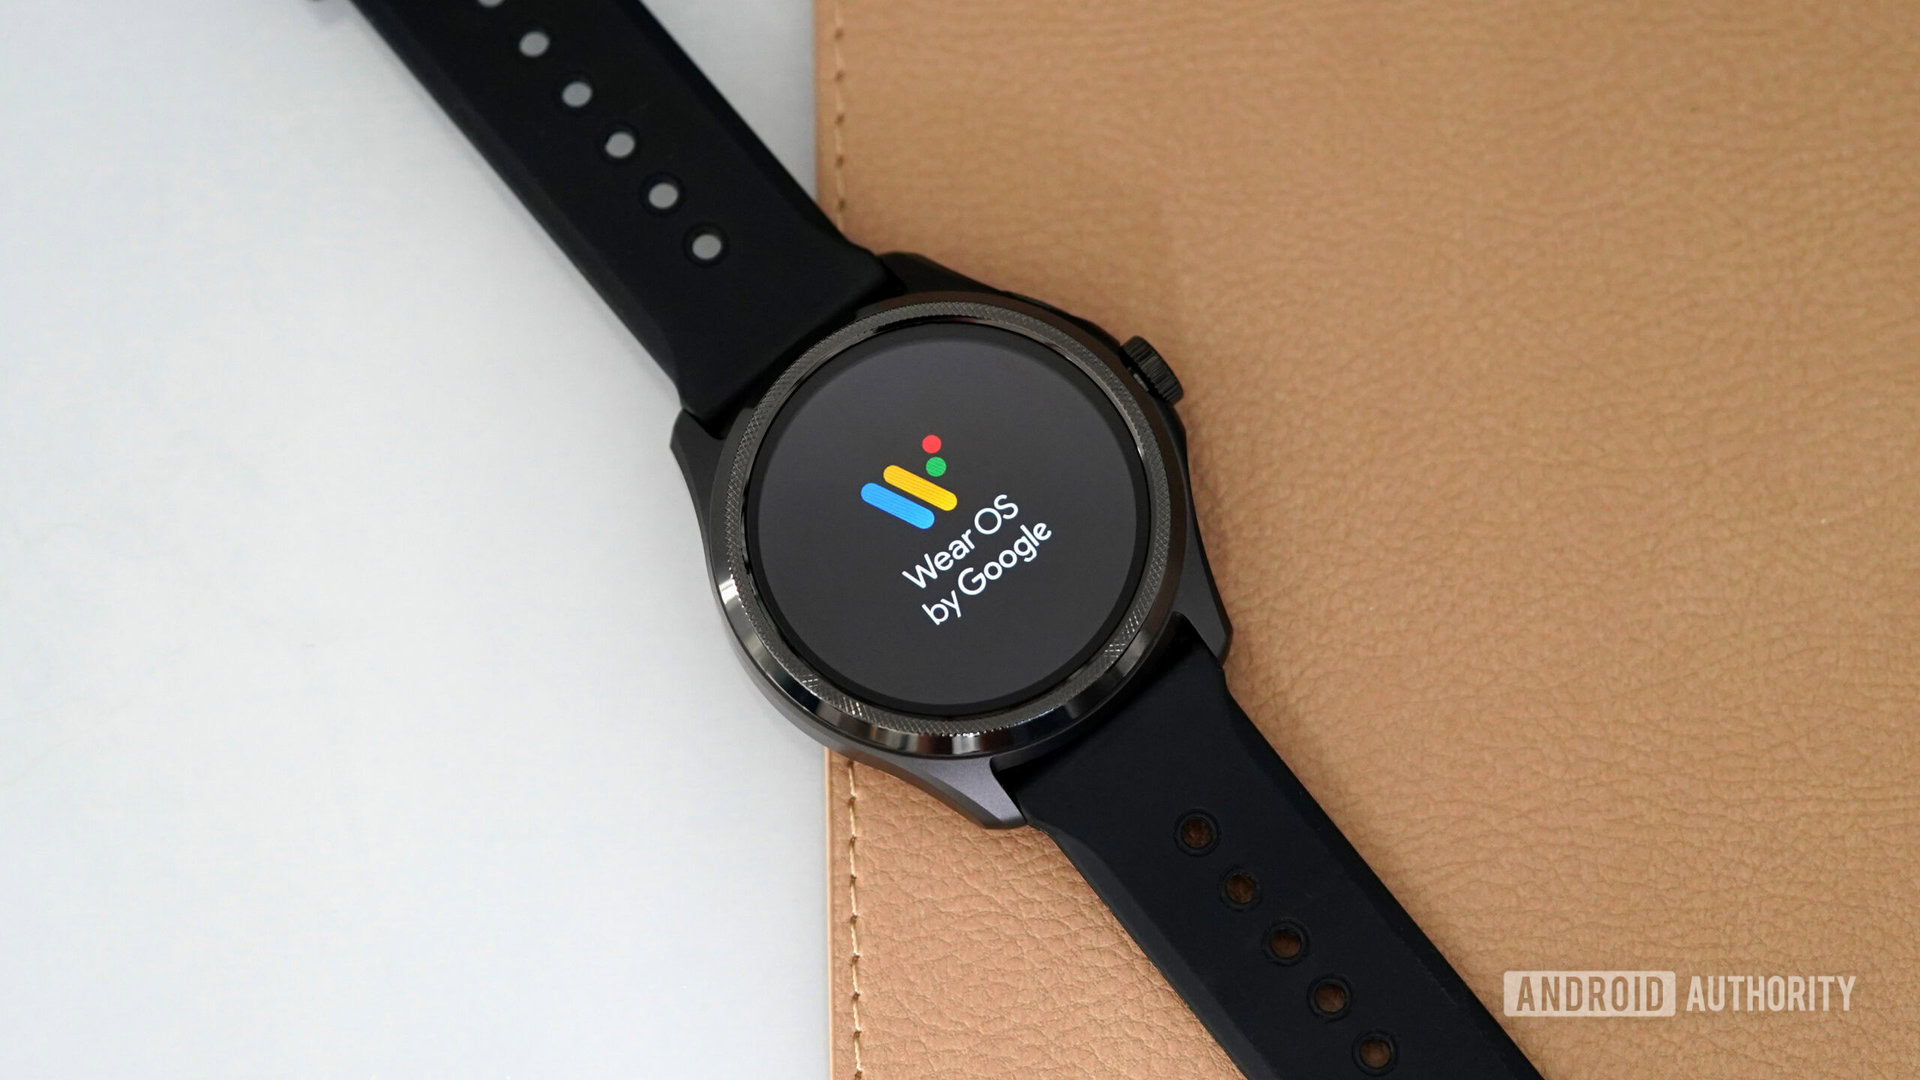 Samsung considering Apple Watch-like square display for future Galaxy Watch